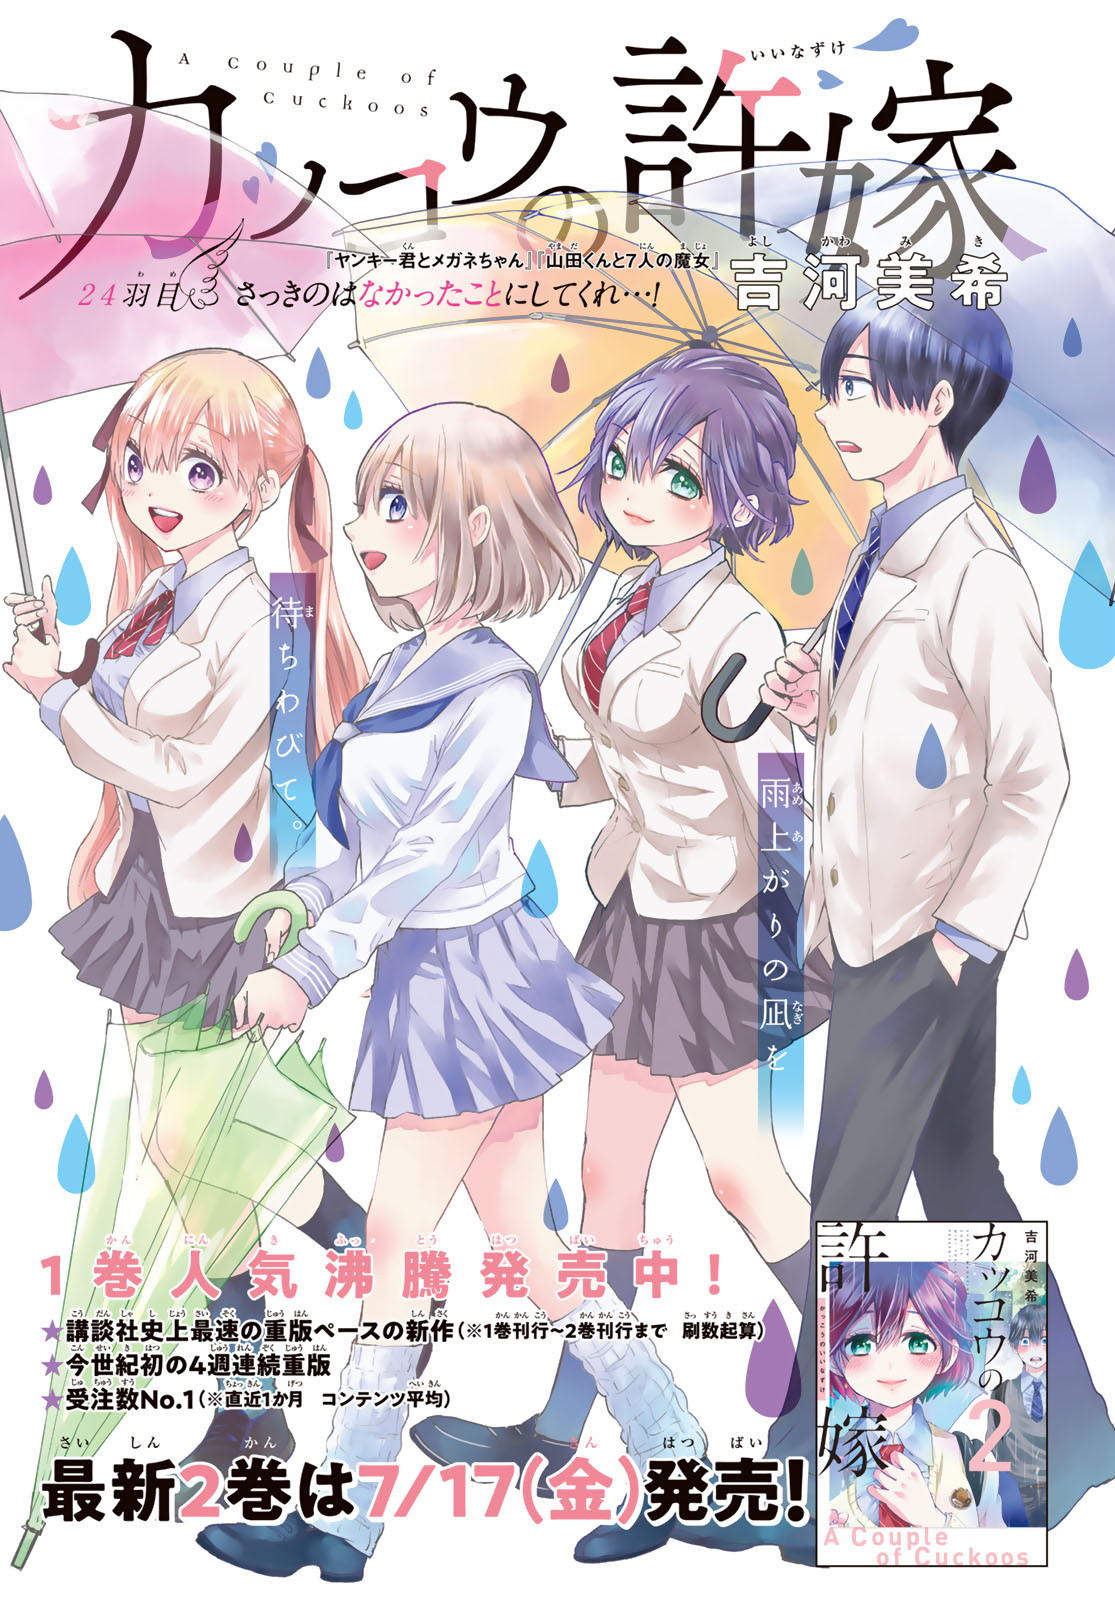 Erika and Nagi Take a Bath Together in A Couple of Cuckoos Episode 22  Preview - Anime Corner